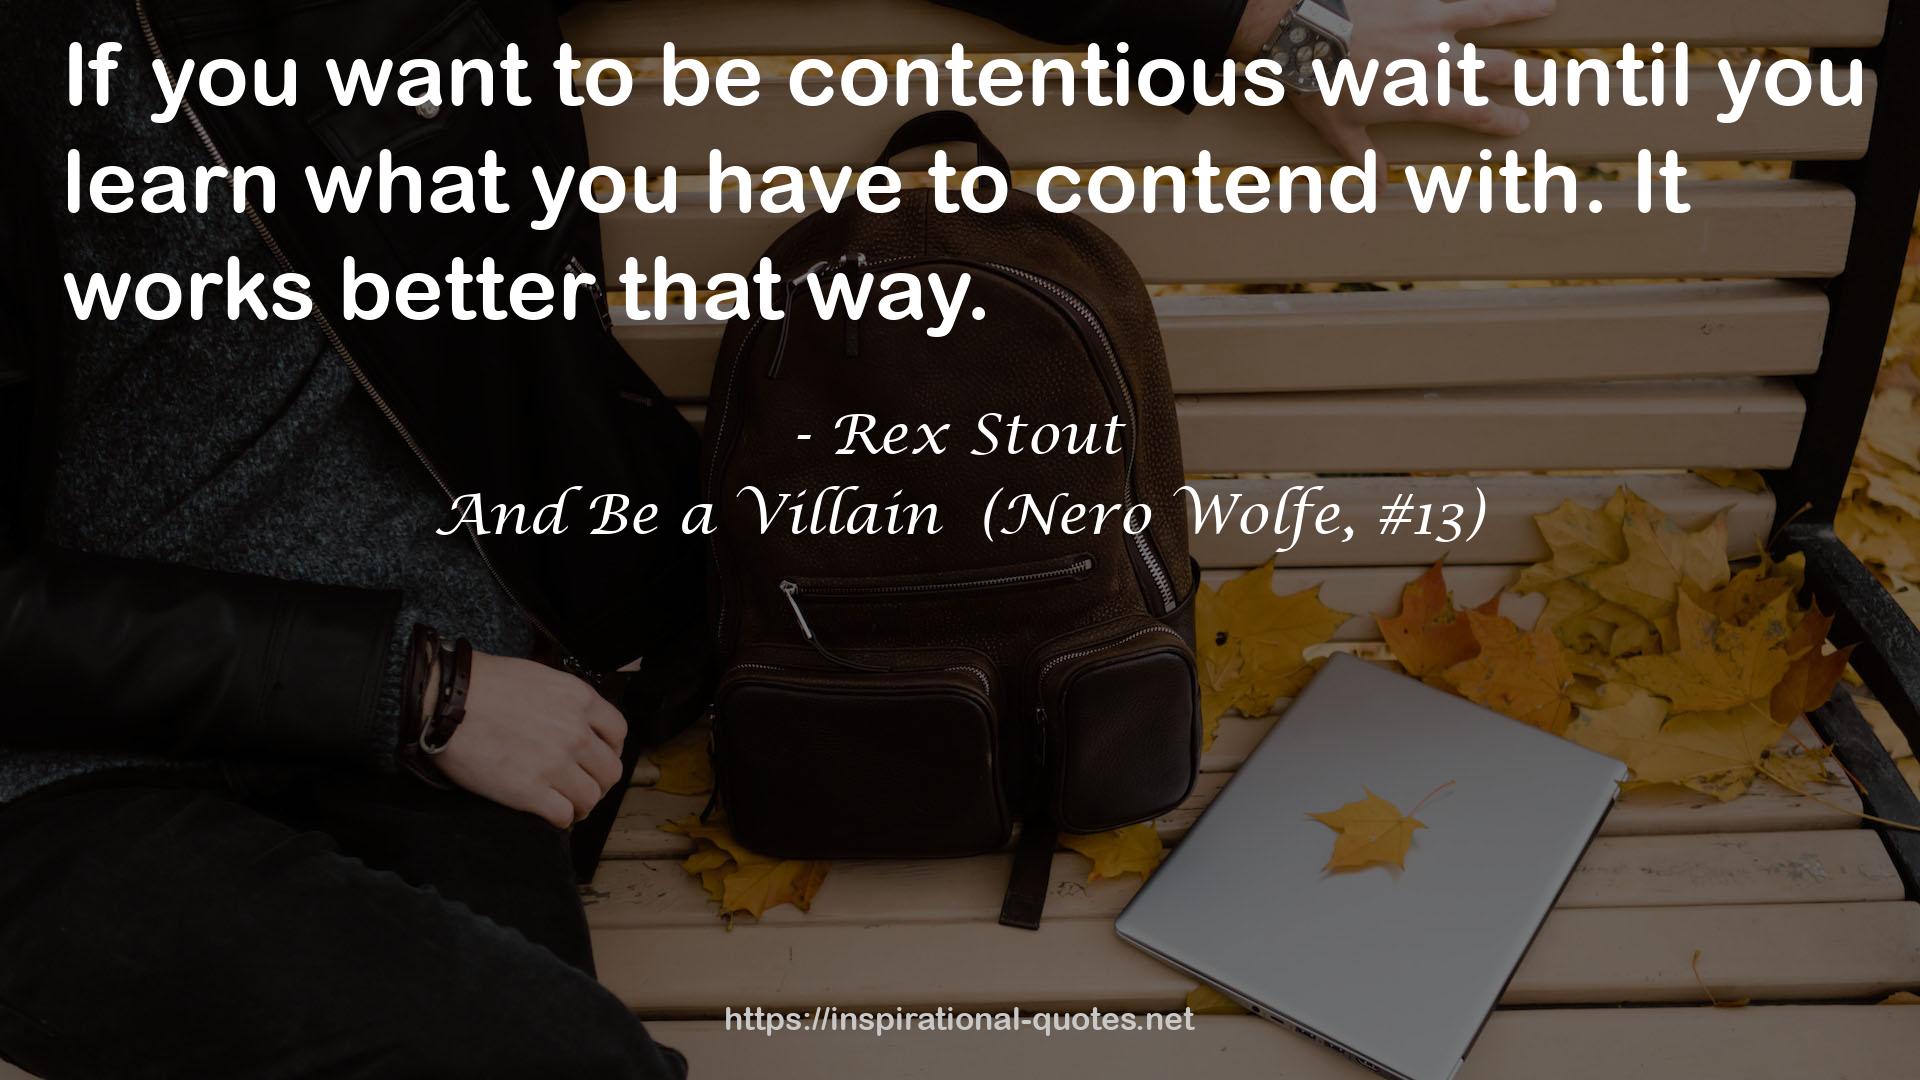 And Be a Villain  (Nero Wolfe, #13) QUOTES